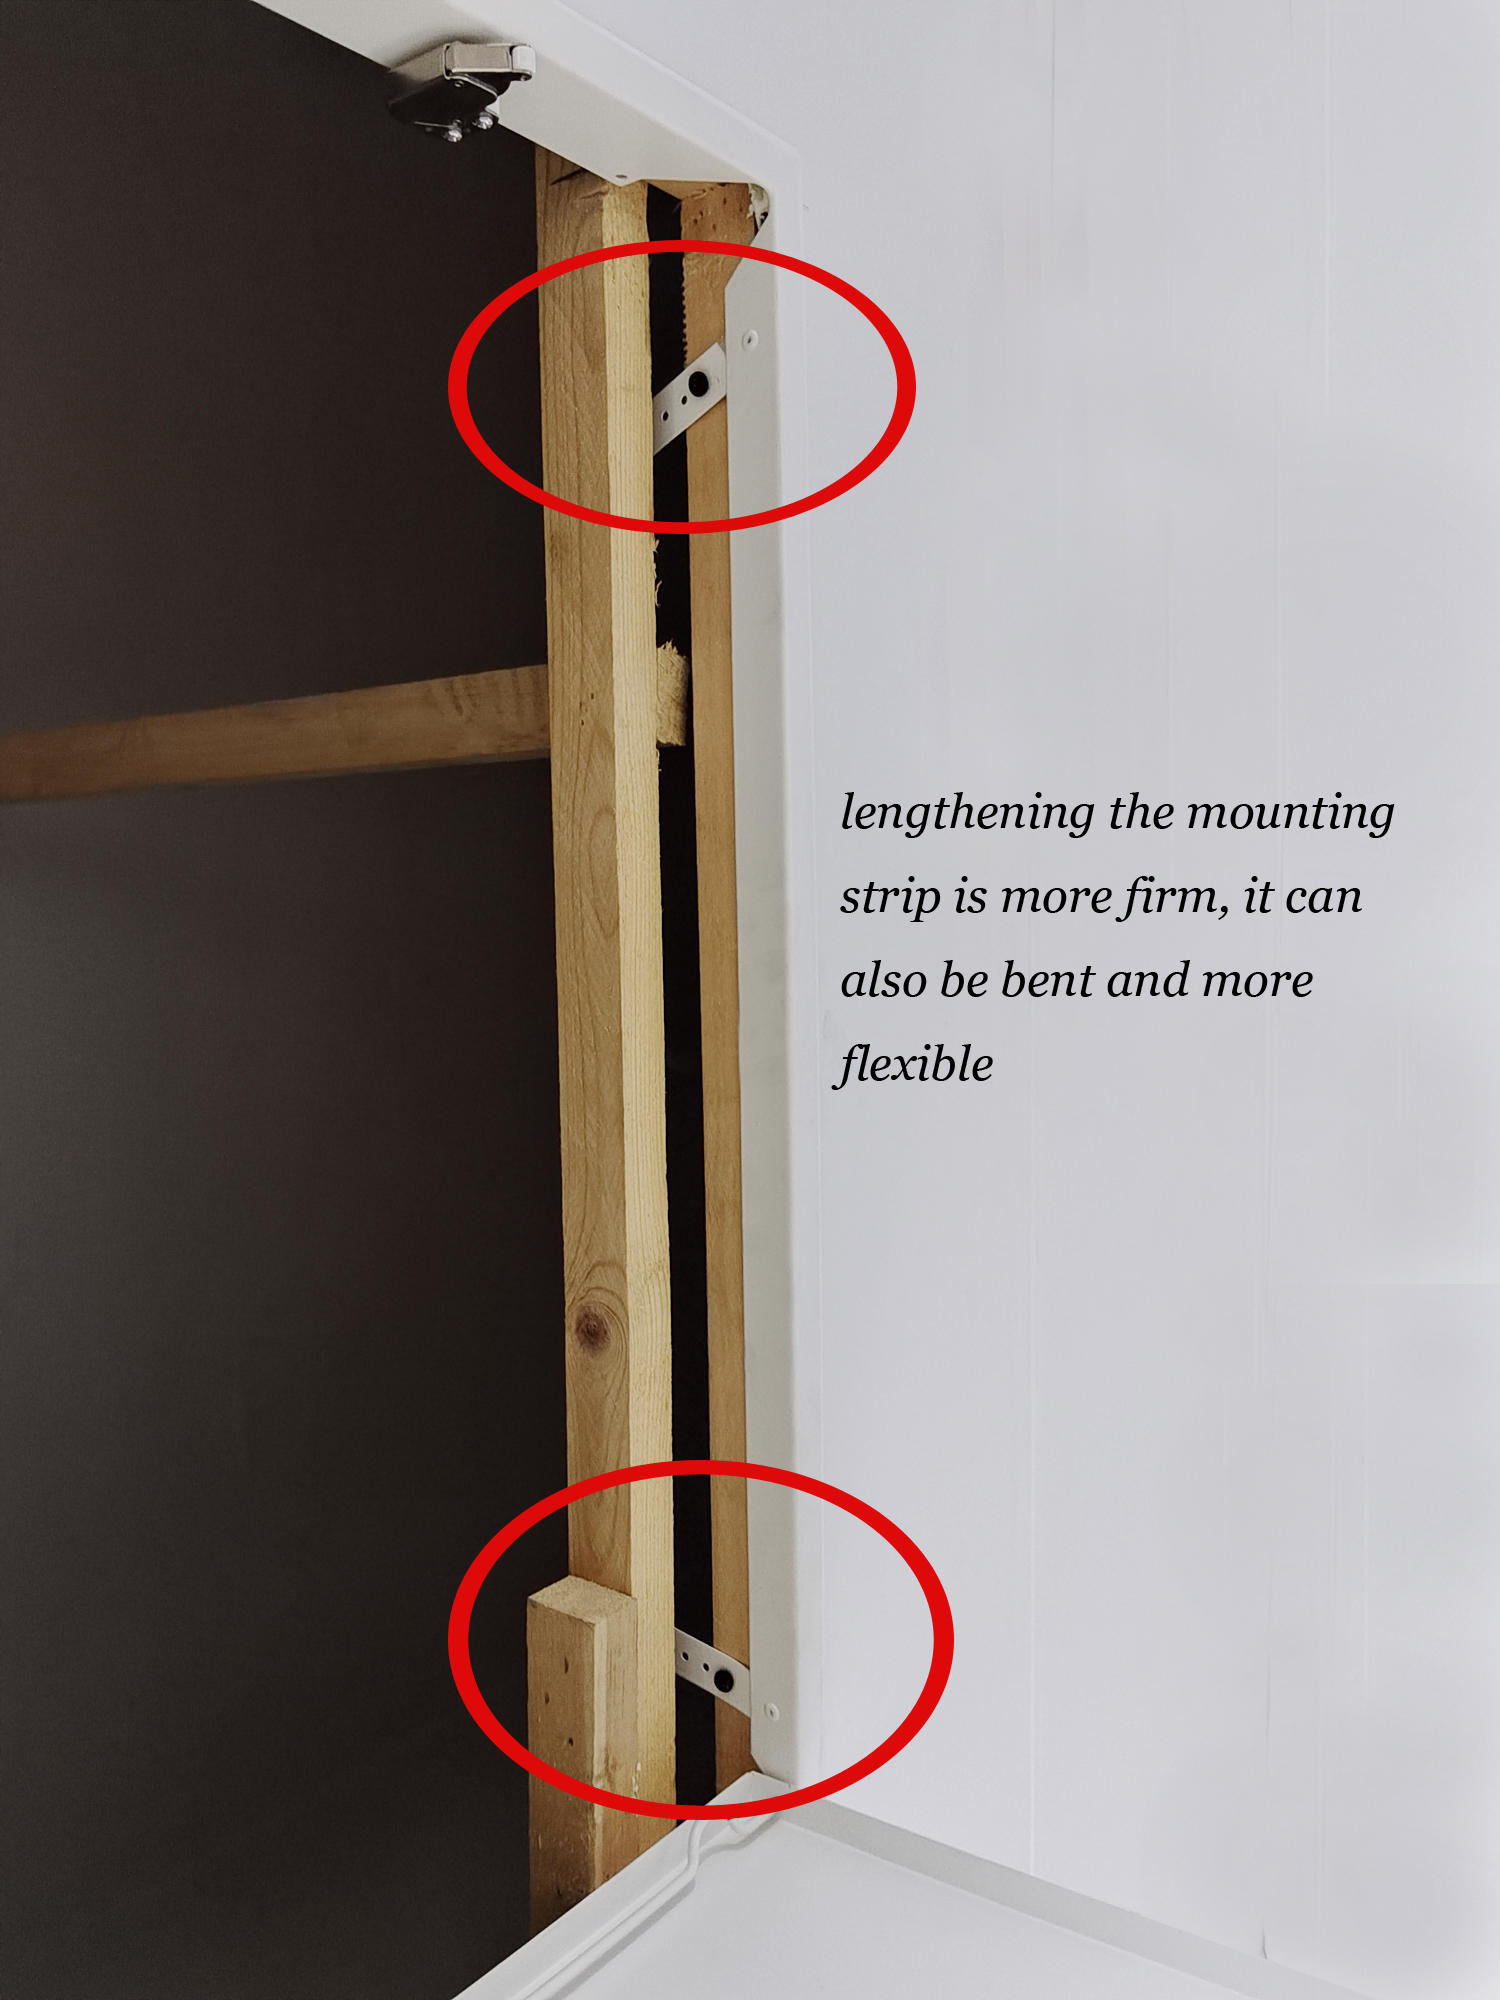 How to make a access panel for wall carpenters？